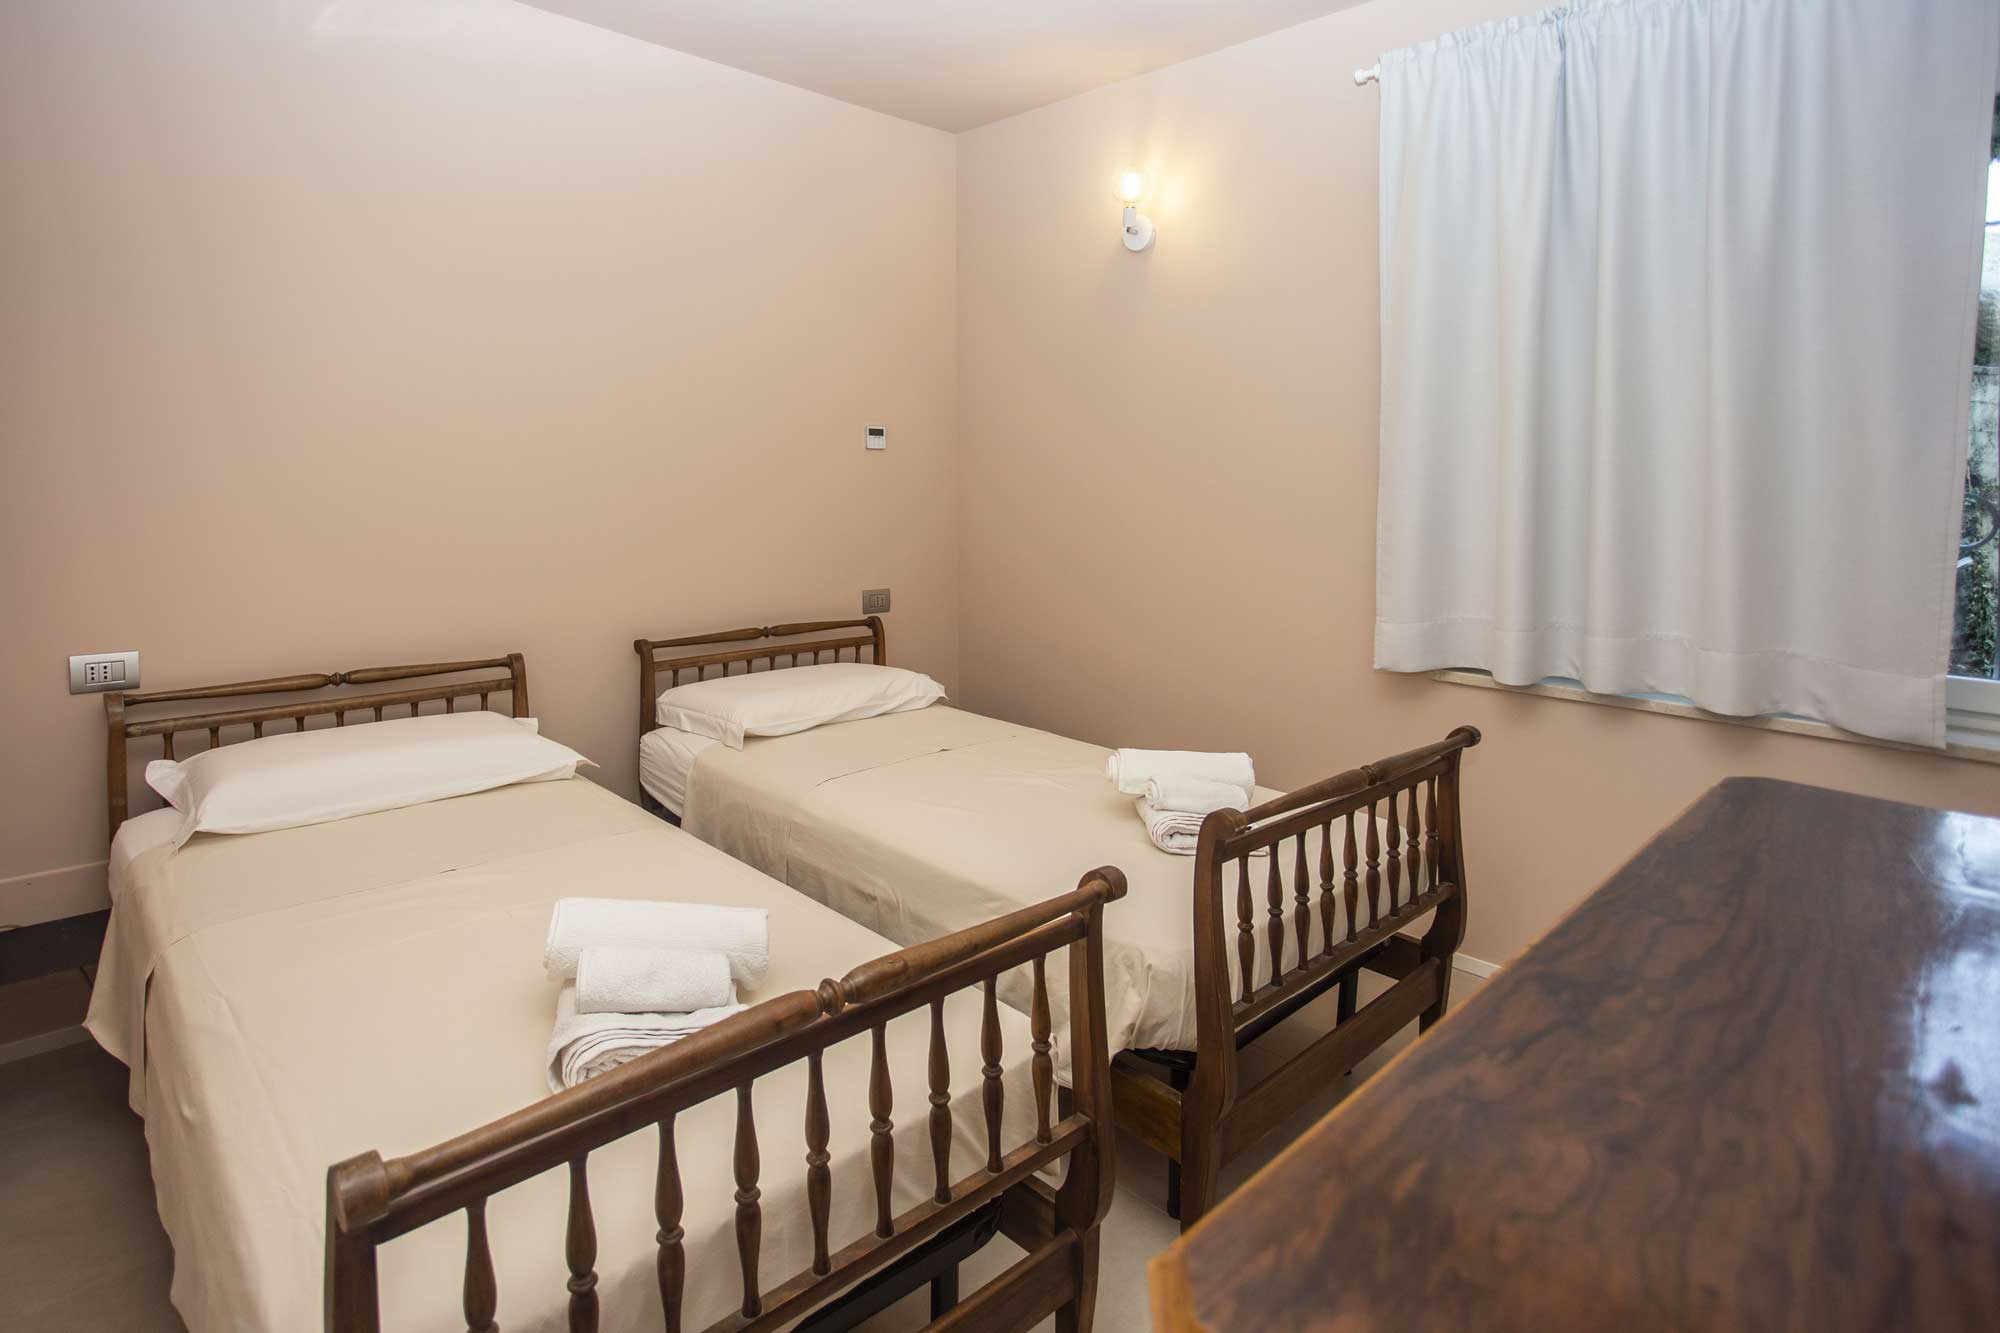 rossa-bel-salo-bed-and-breakfast-7